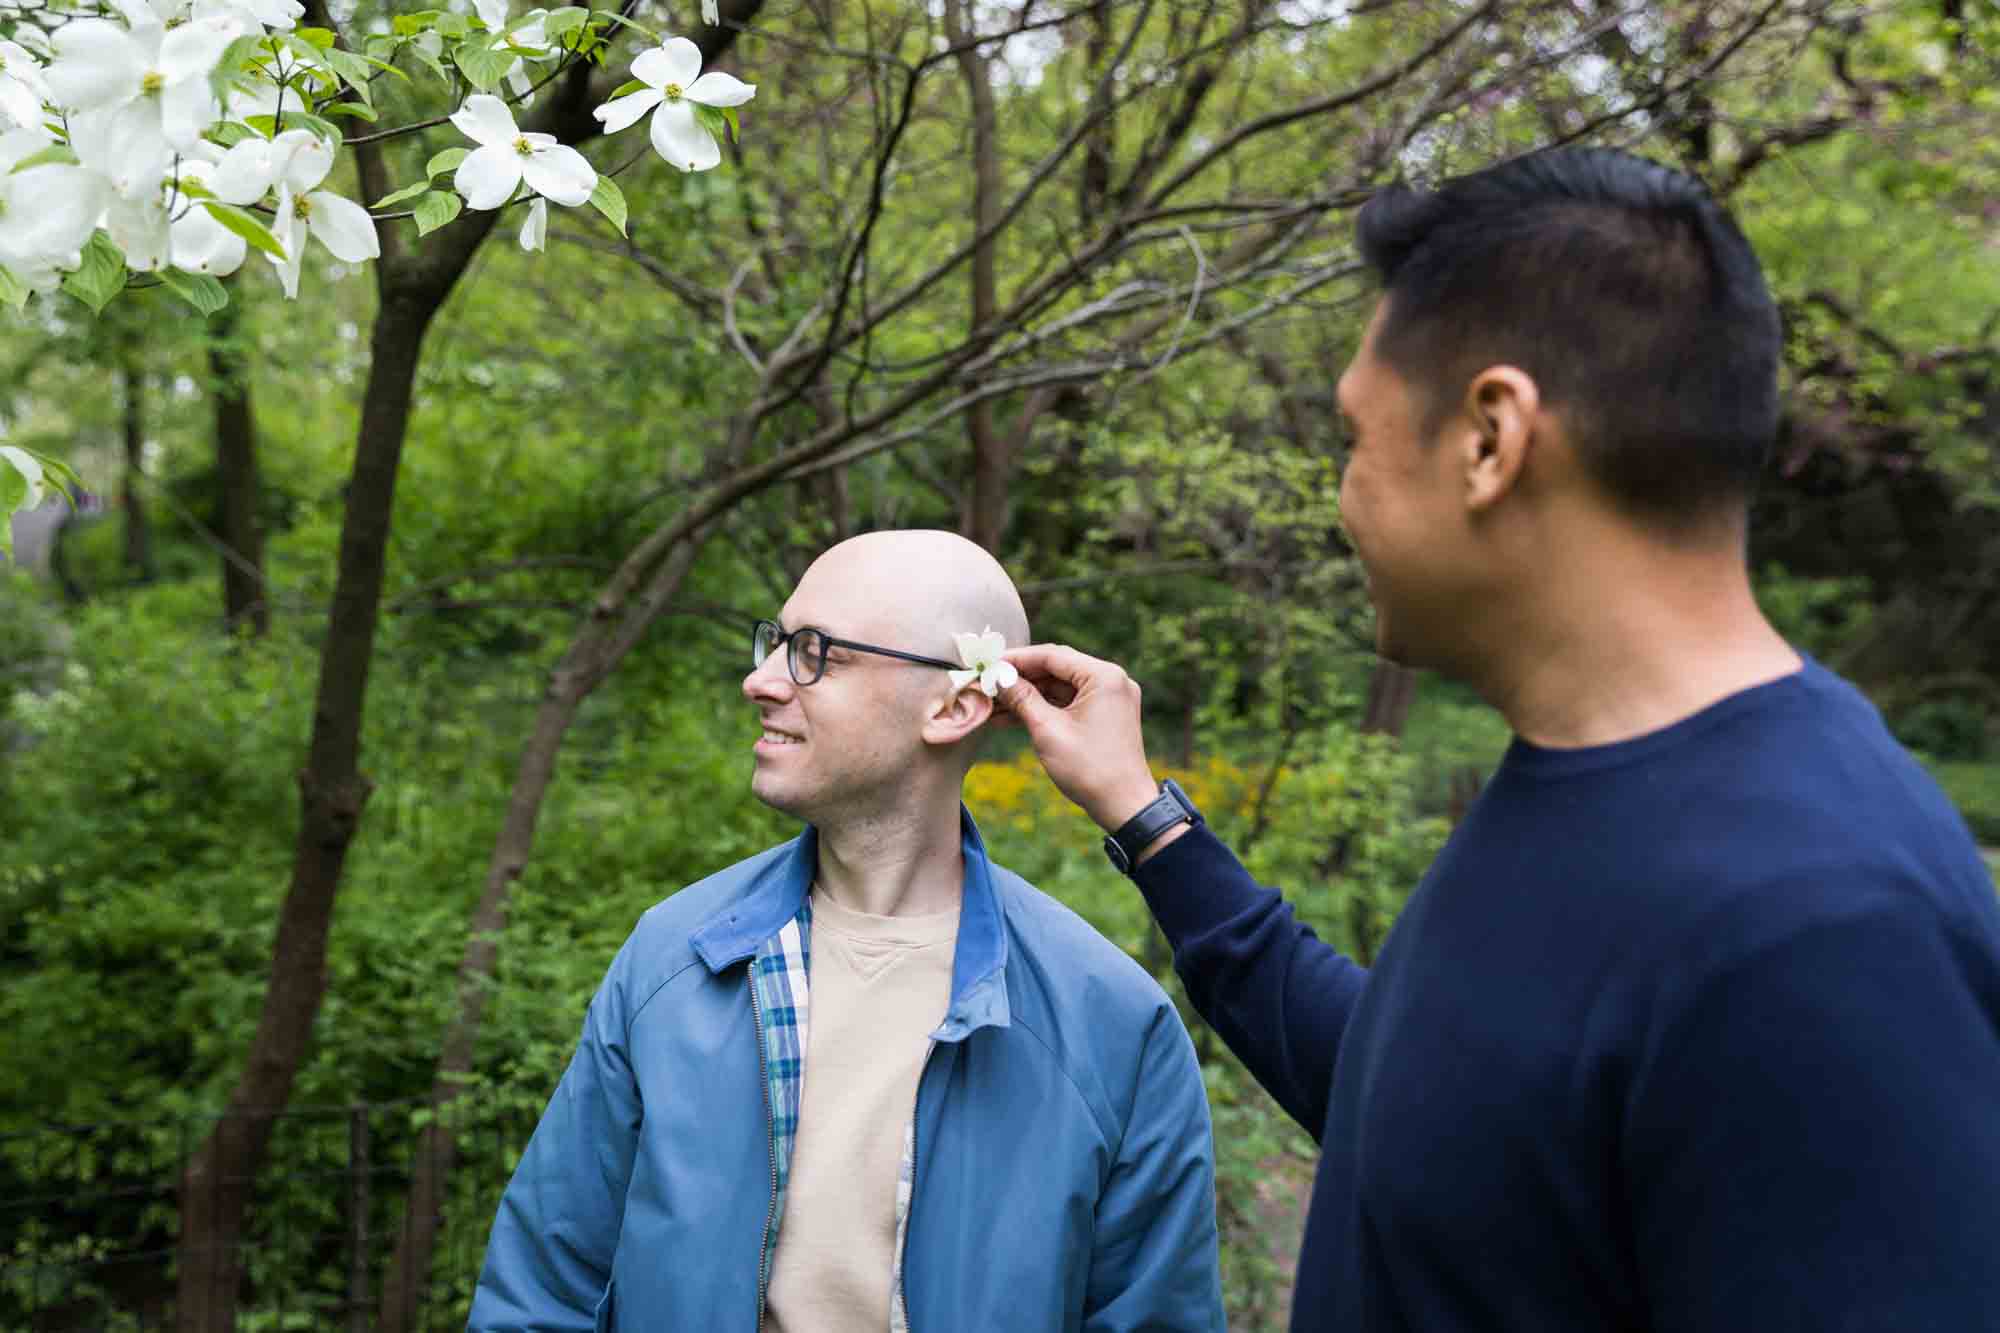 Man putting flower behind other man's ear